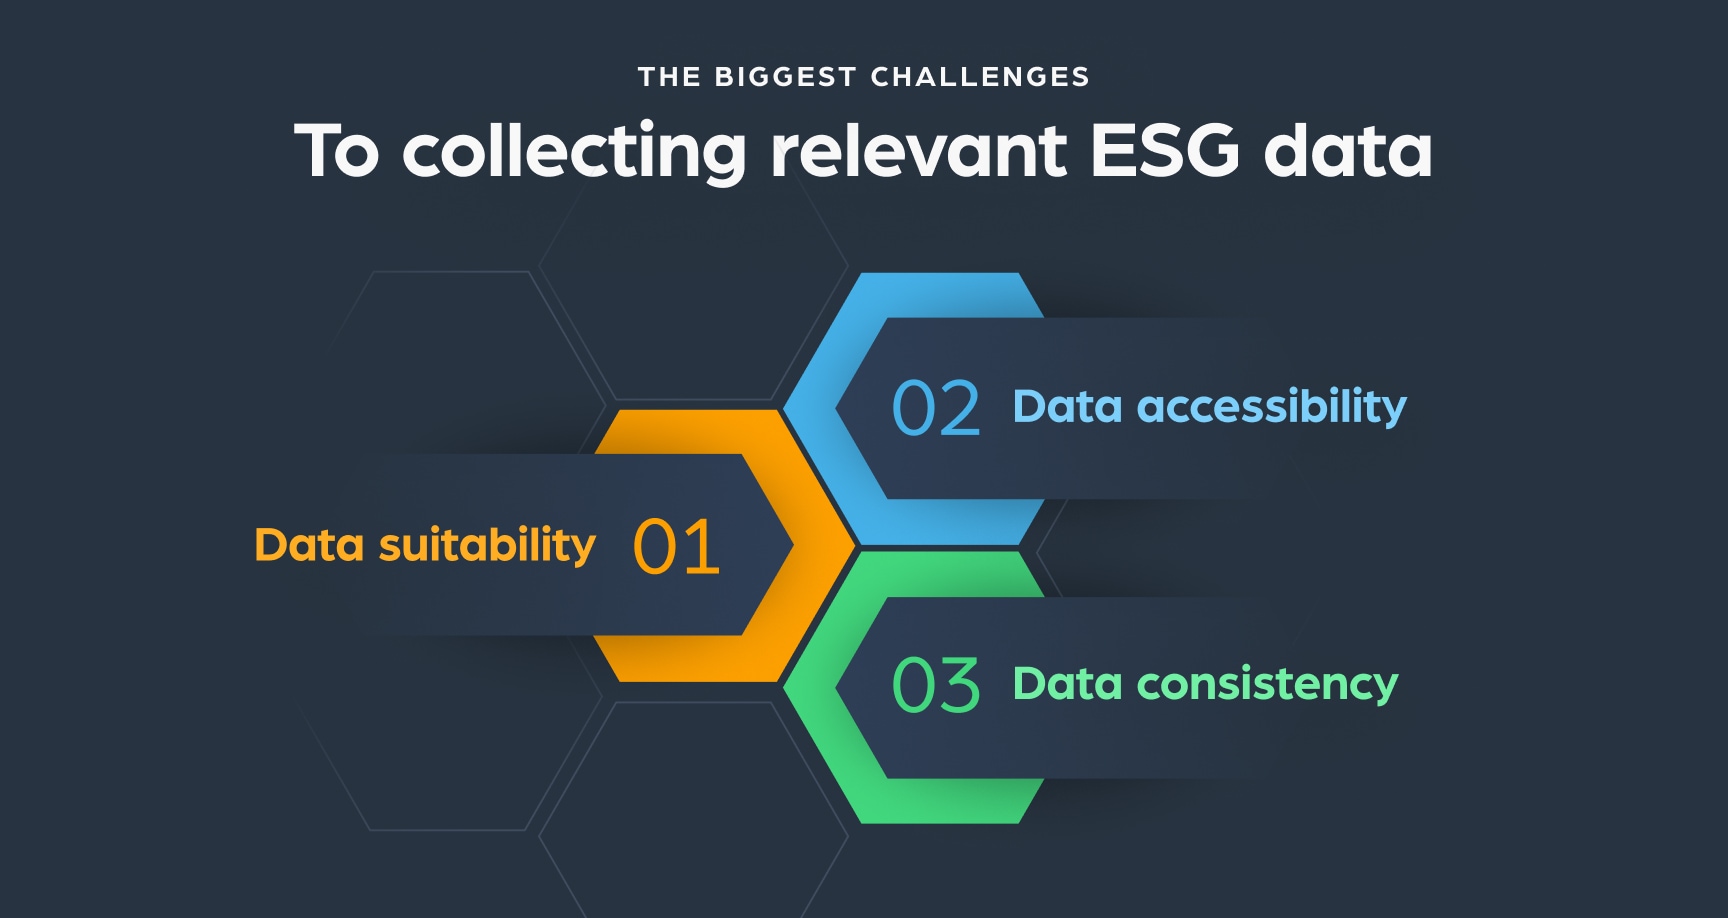 The biggest challenges to collecting relevant ESG data